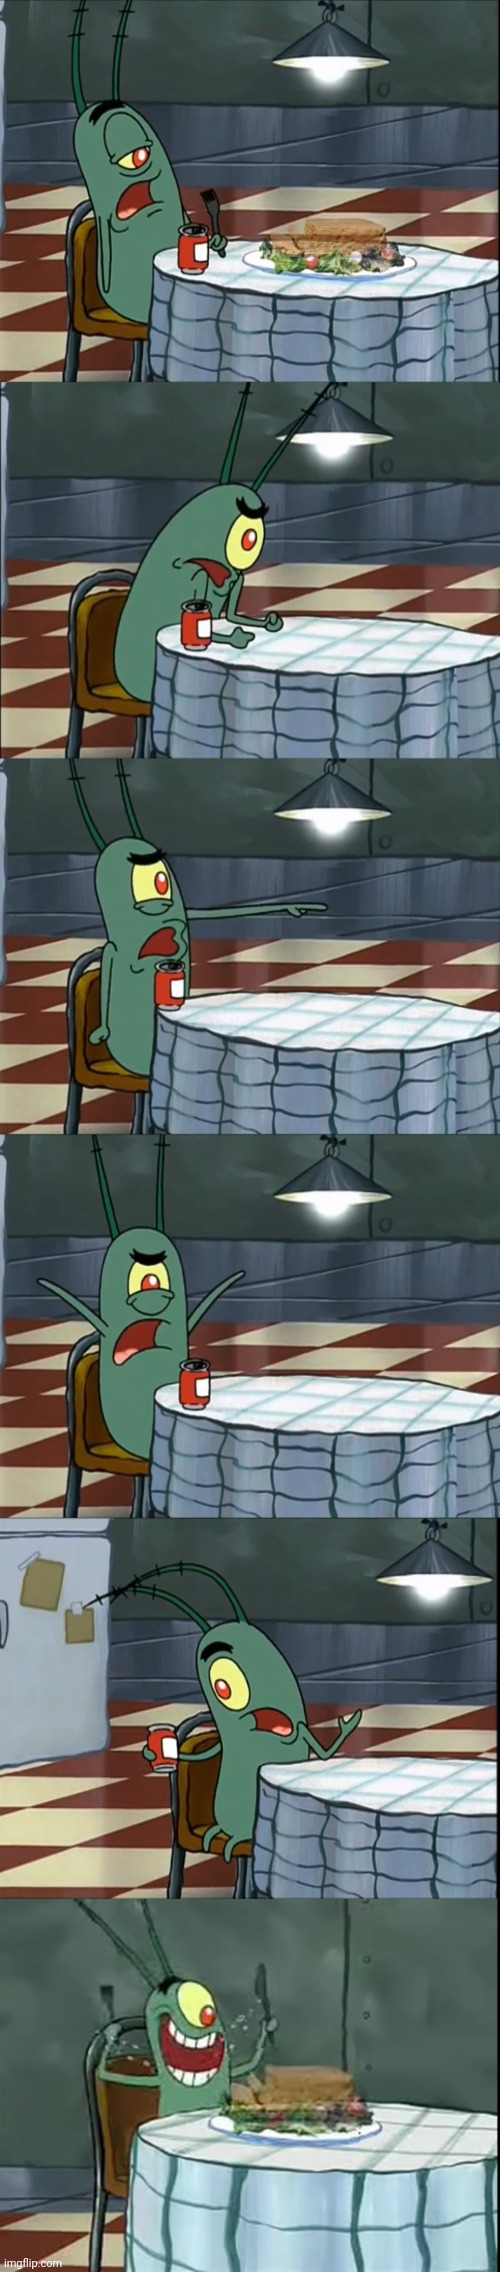 Plankton meatloaf 6 pic meme | image tagged in plankton | made w/ Imgflip meme maker